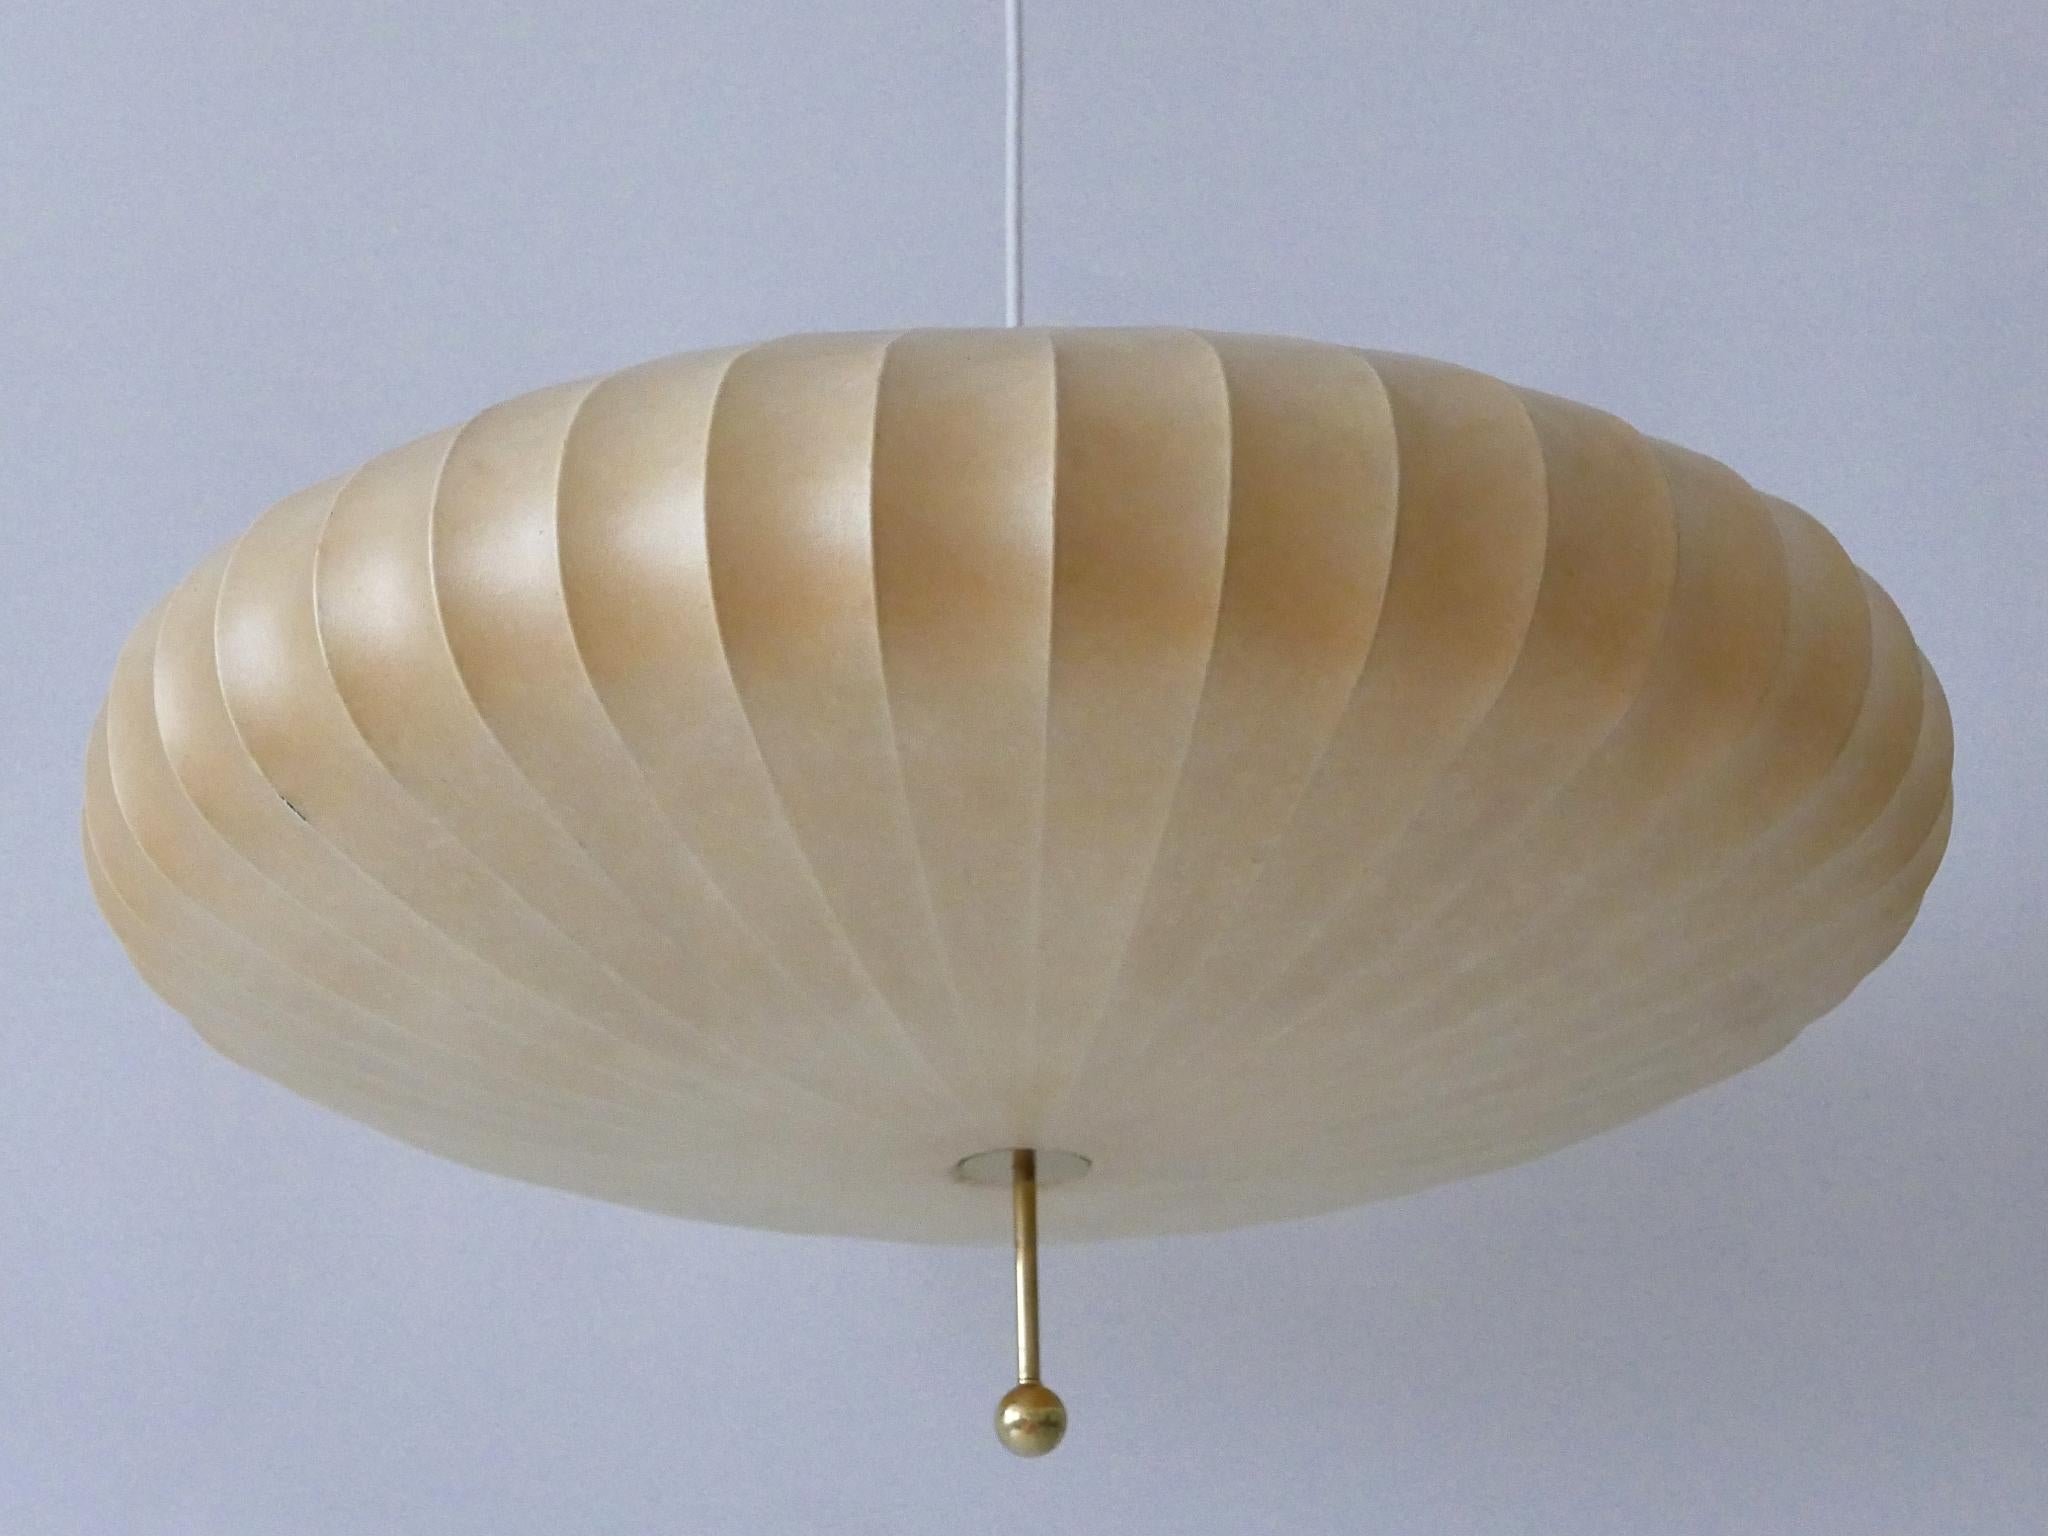 Large, extremely rare and highly decorative Mid-Century Modern cocoon pendant lamp or hanging light. Designed & manufactured probably by Goldkant Leuchten, Germany, 1960s.

Executed in sprayed latex material, brass and metal, the pendant lamp needs